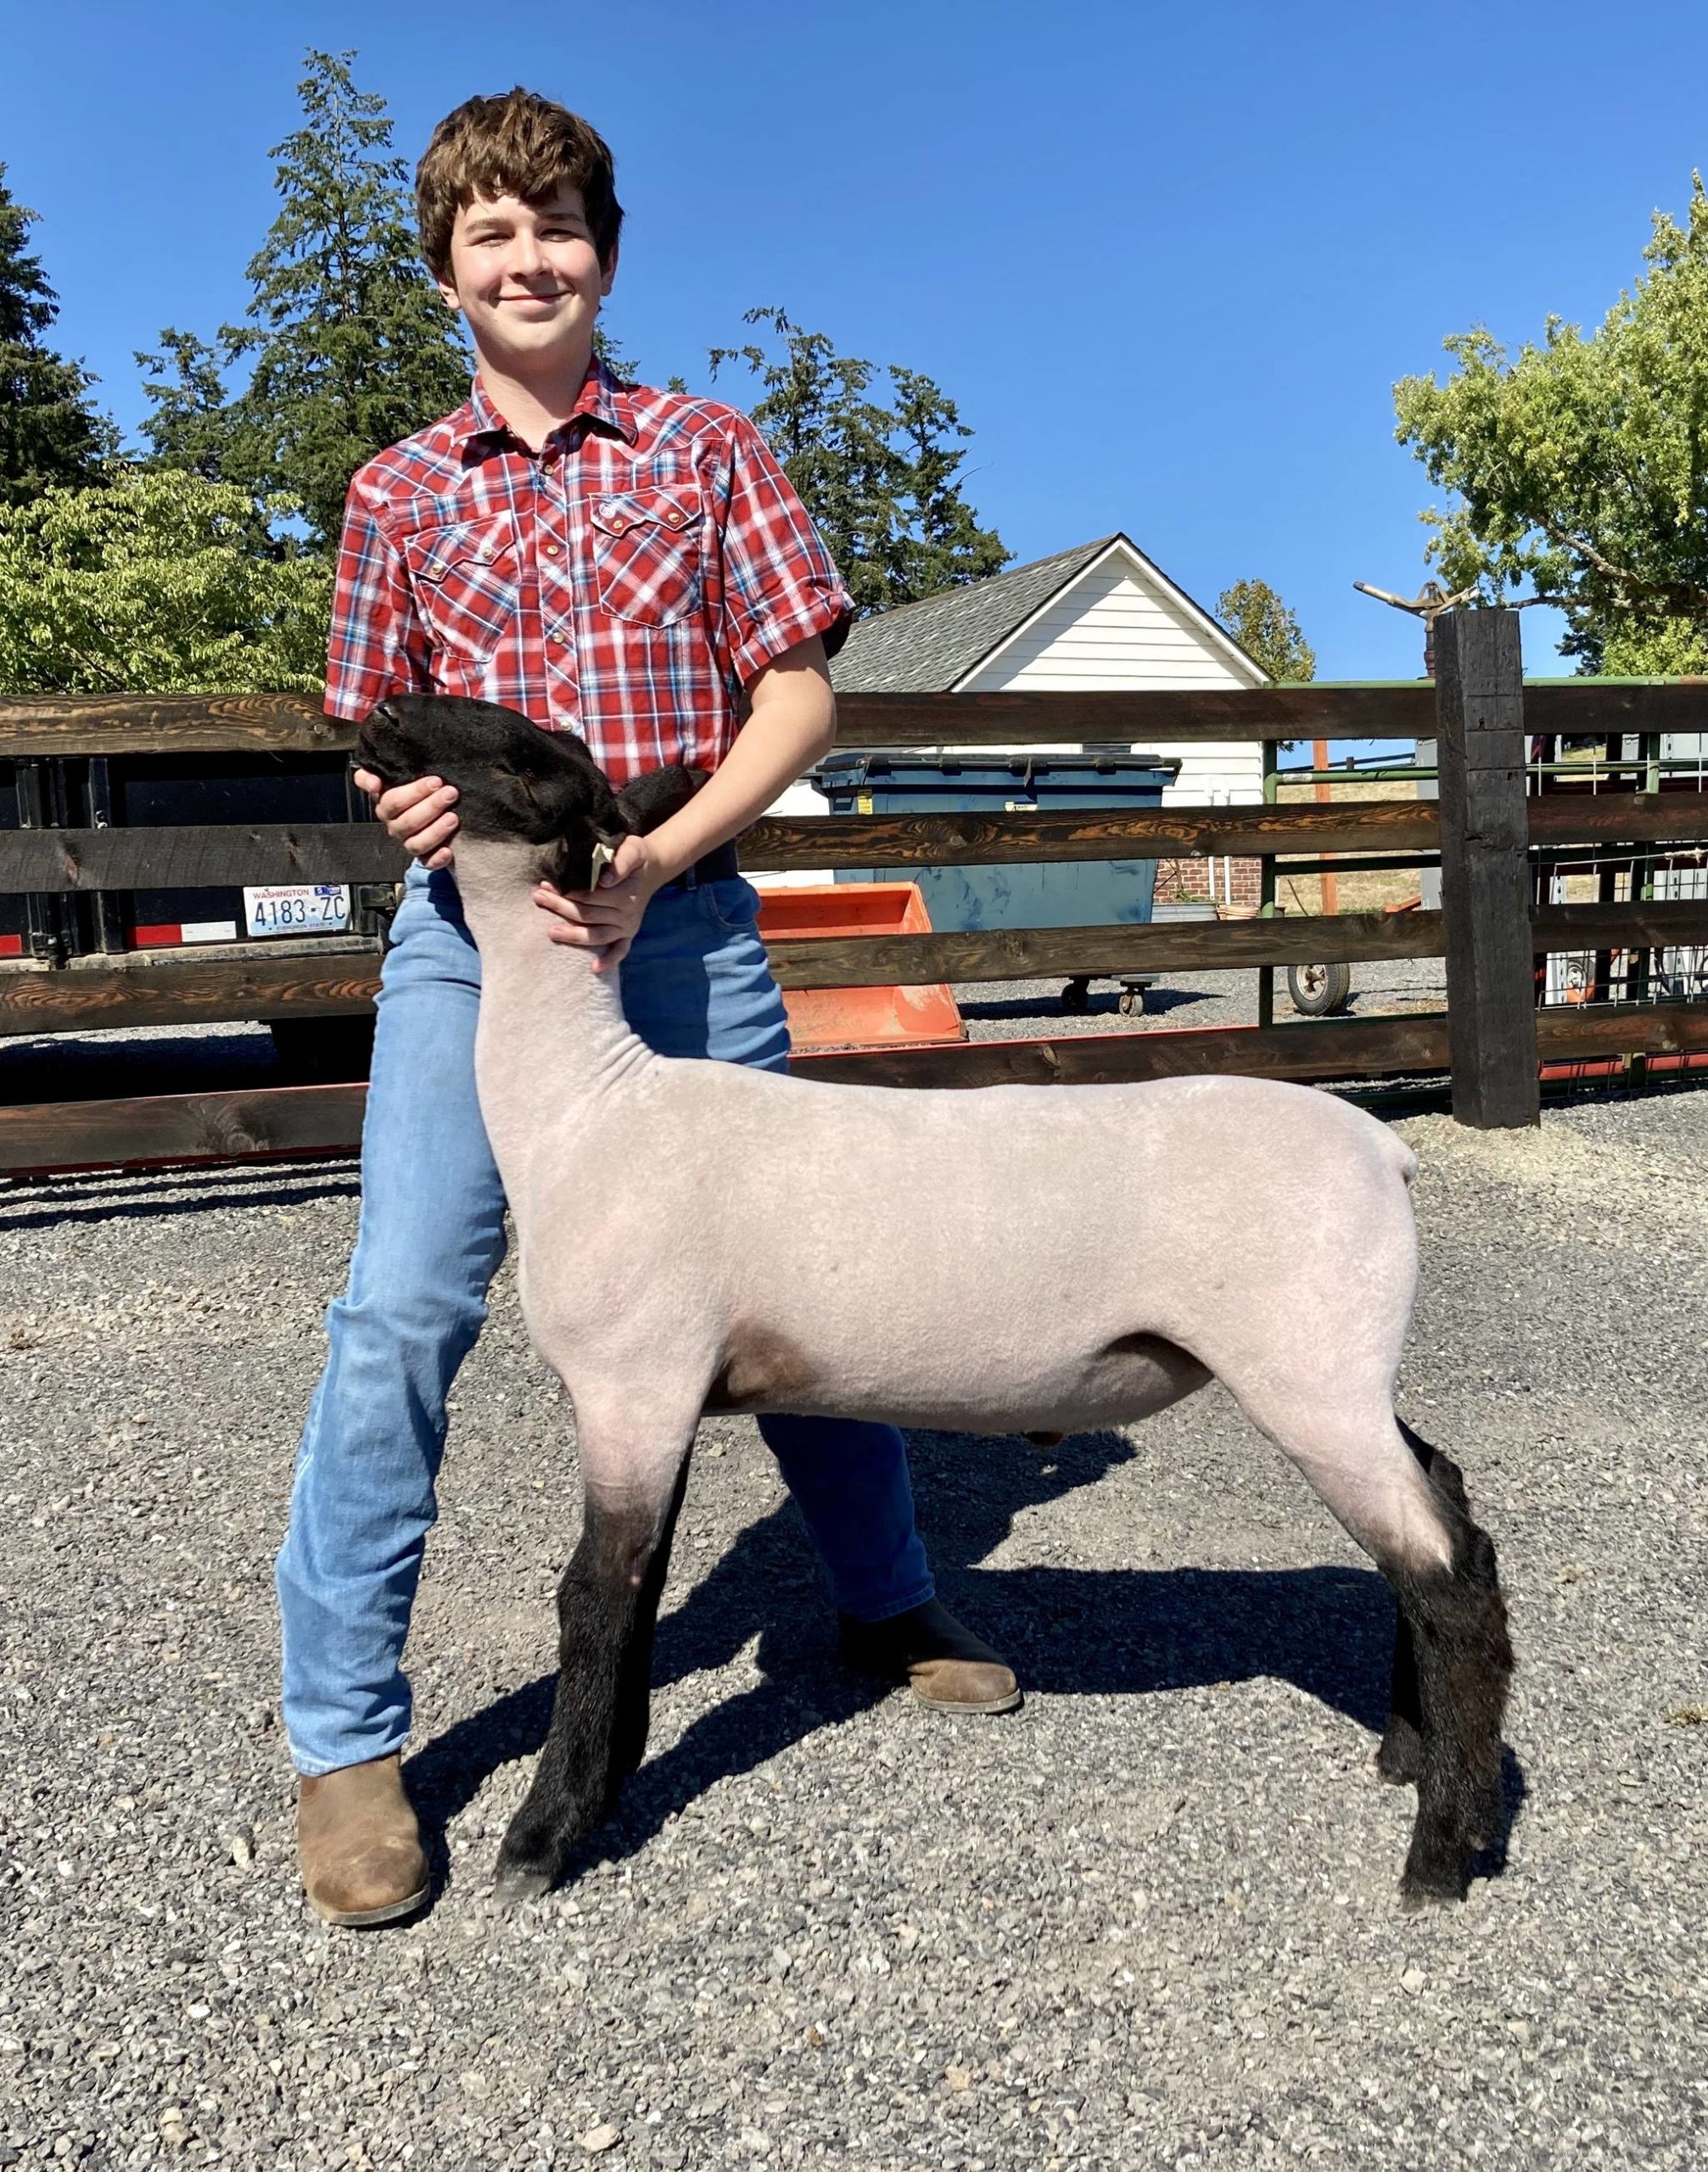 Anthony Amaro, from San Juan Island, won reserve grand champion with his market lamb. (Contributed photo)